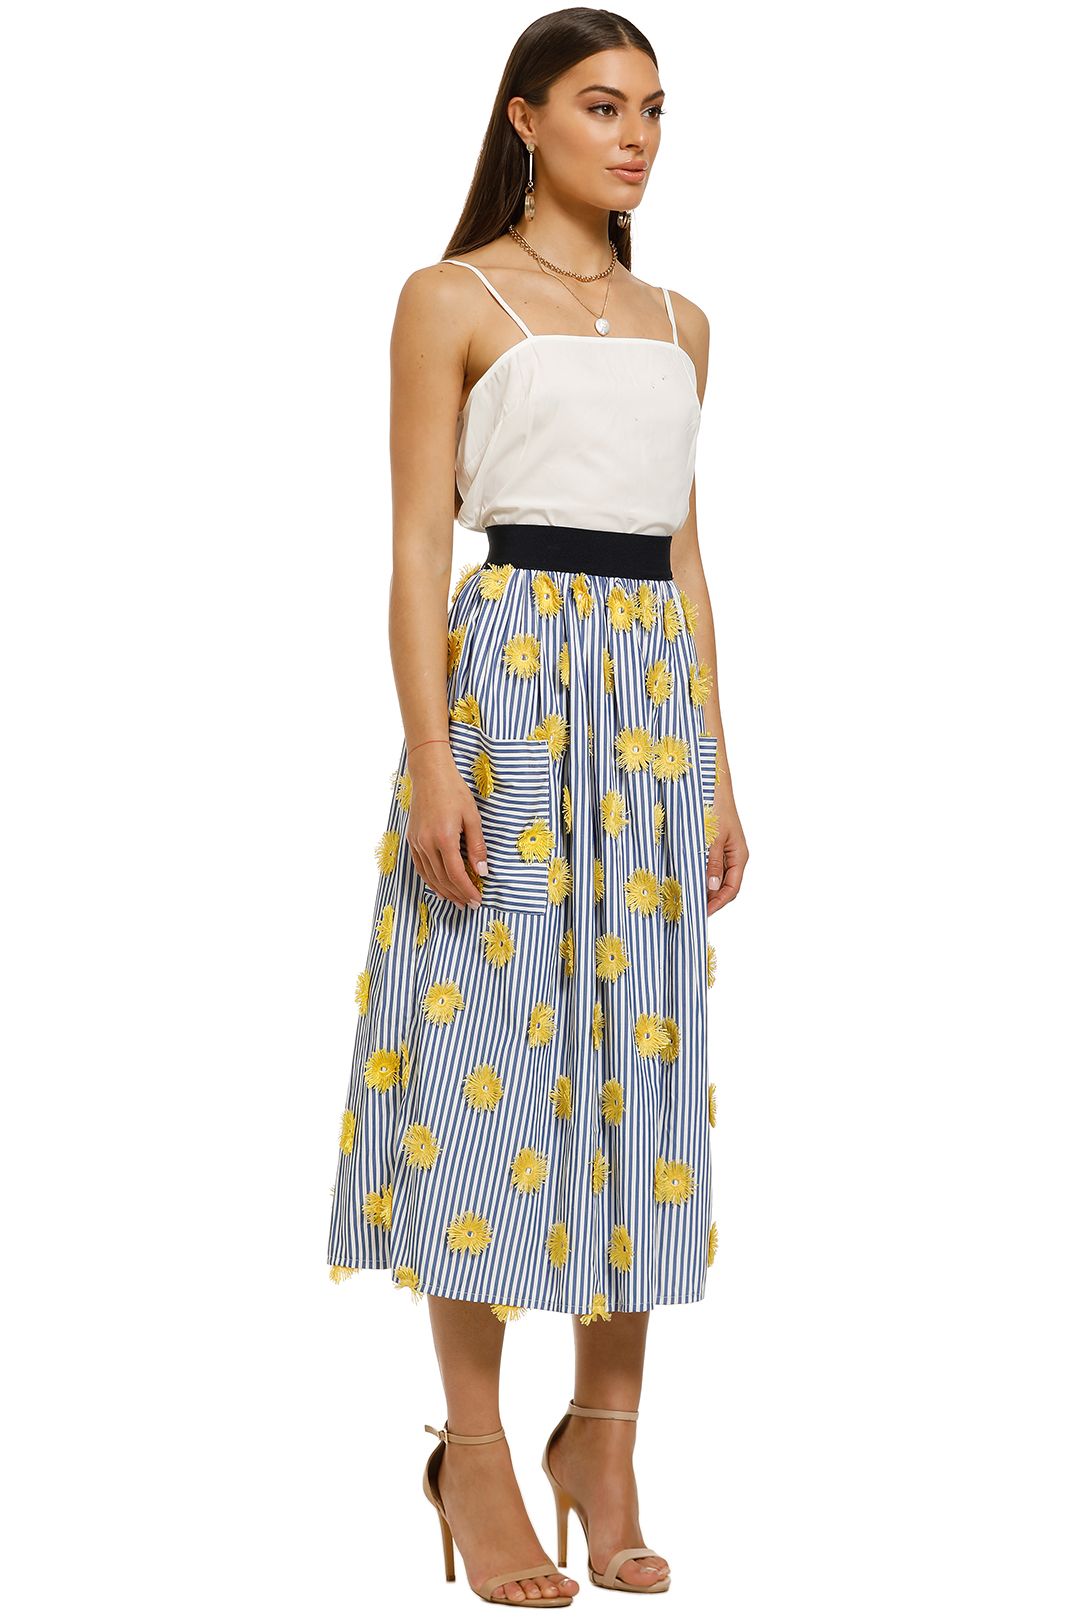 Full Sun Skirt in Stripes by Curate by Trelise Cooper for Rent | GlamCorner